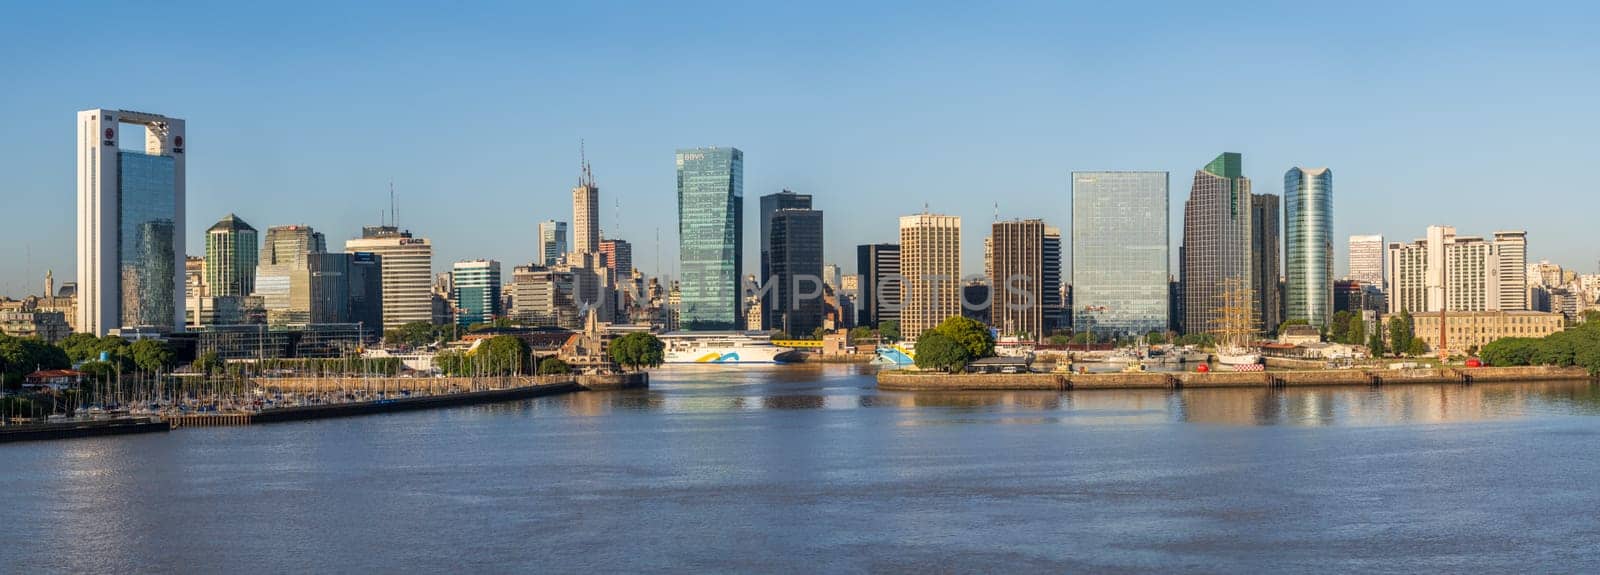 Buenos Aires, Argentina - 6 February 2023: Wide panorama of the city skyline at the entrance to the port